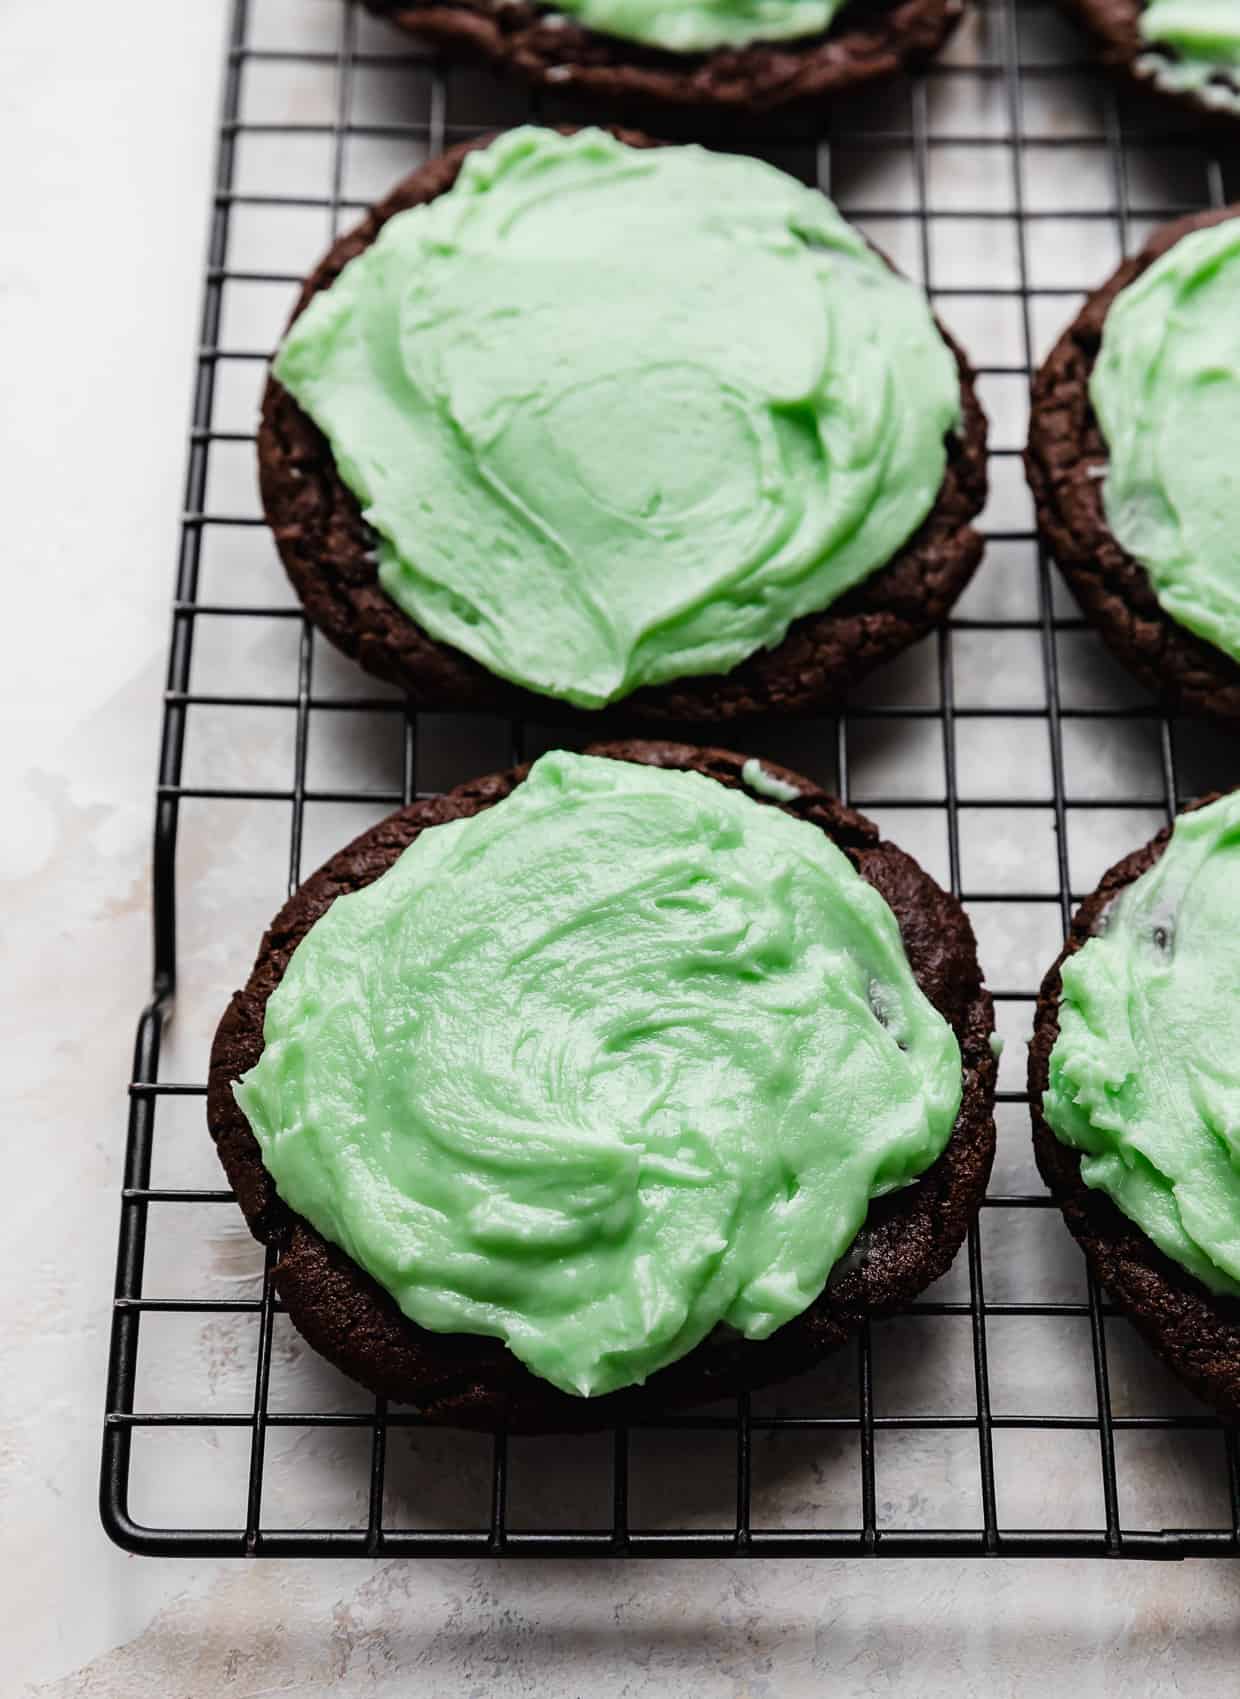 A mint colored frosting spread on a chocolate cookie that's on a wire cooling rack.